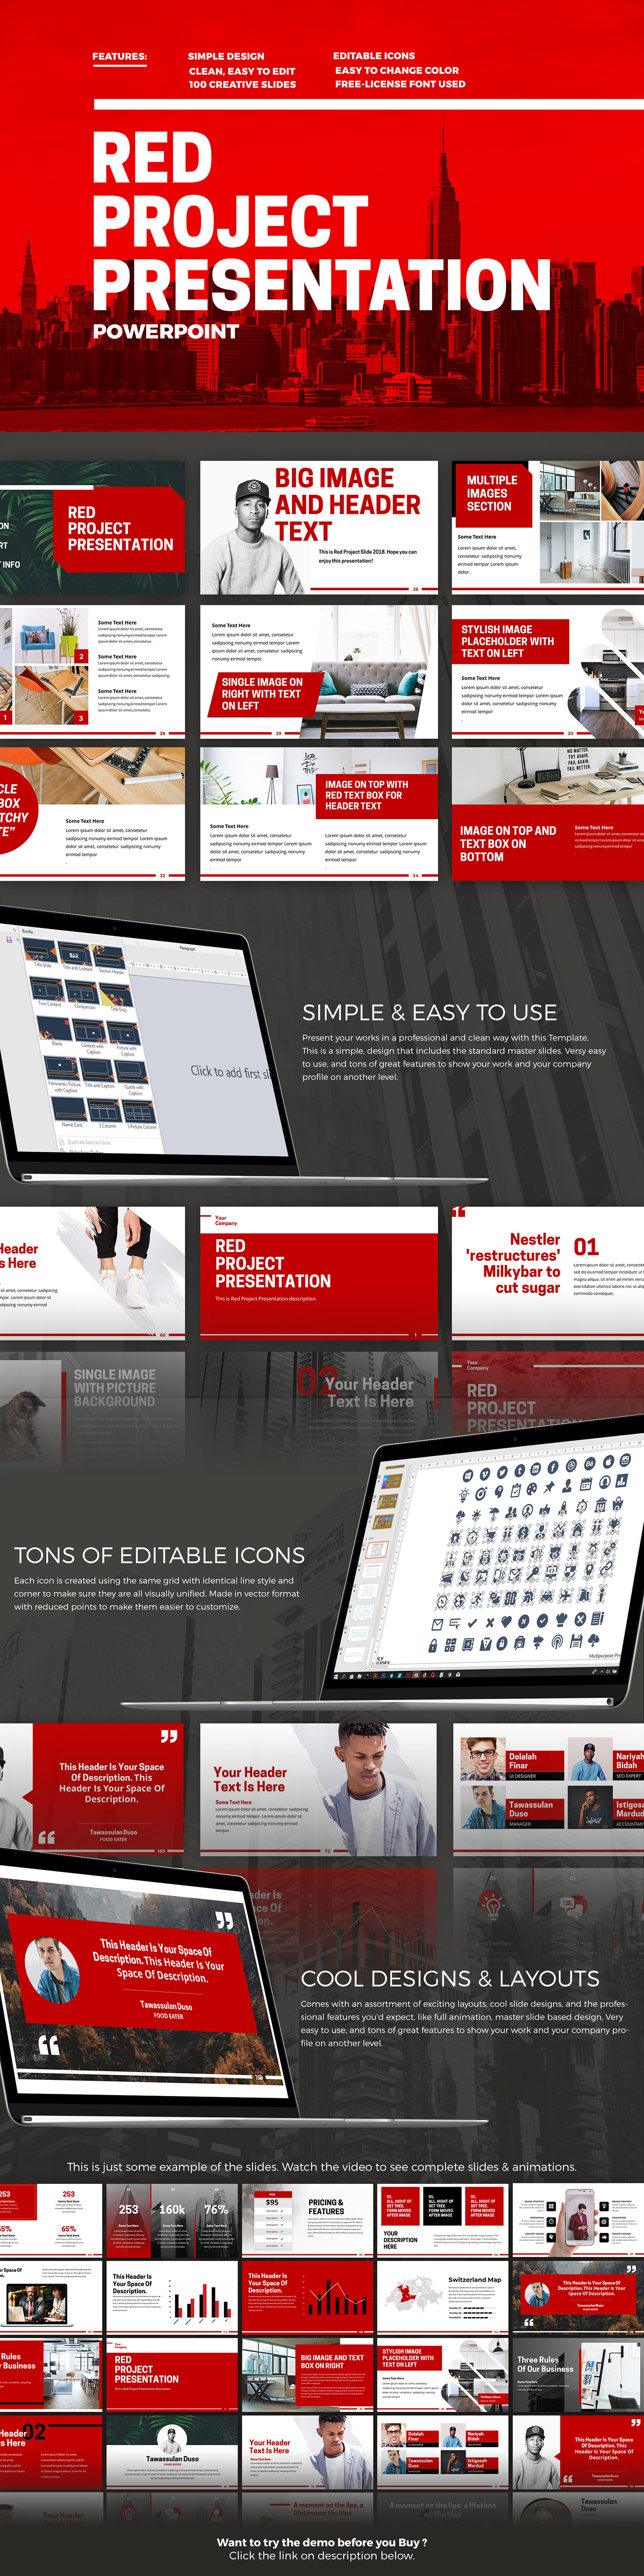 free freebie download template Powerpoint Keynote presentation pptx infographic red